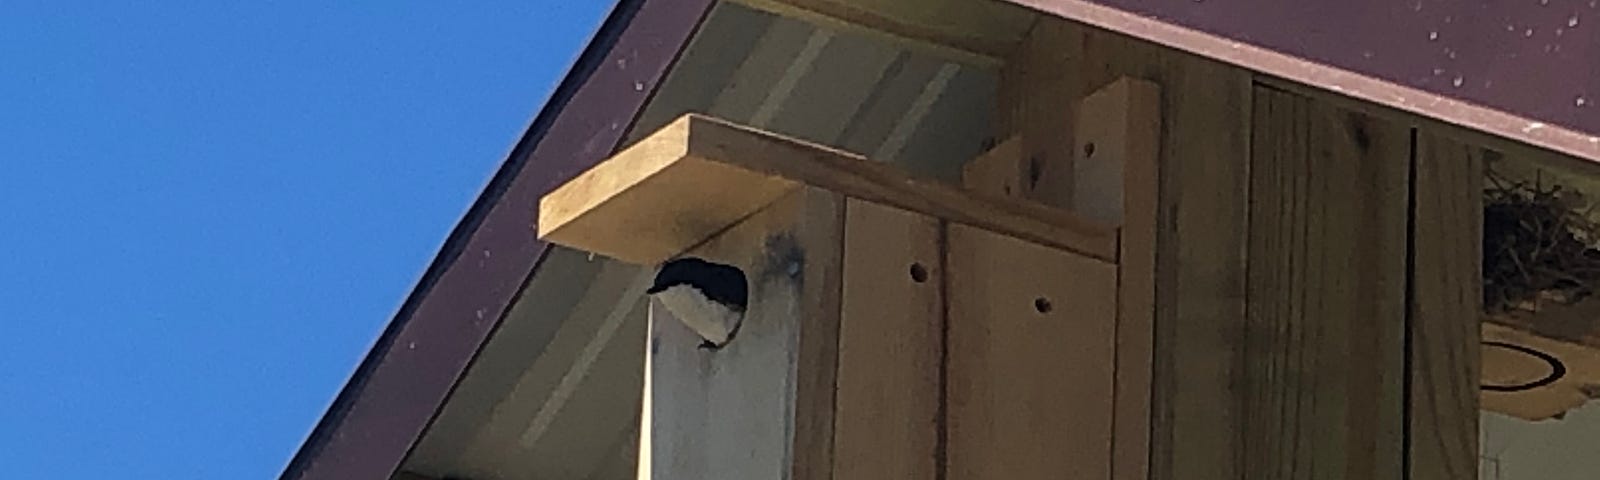 A small bird, dark blue on top with a white underside, looks out from a nesting box attached to a building.